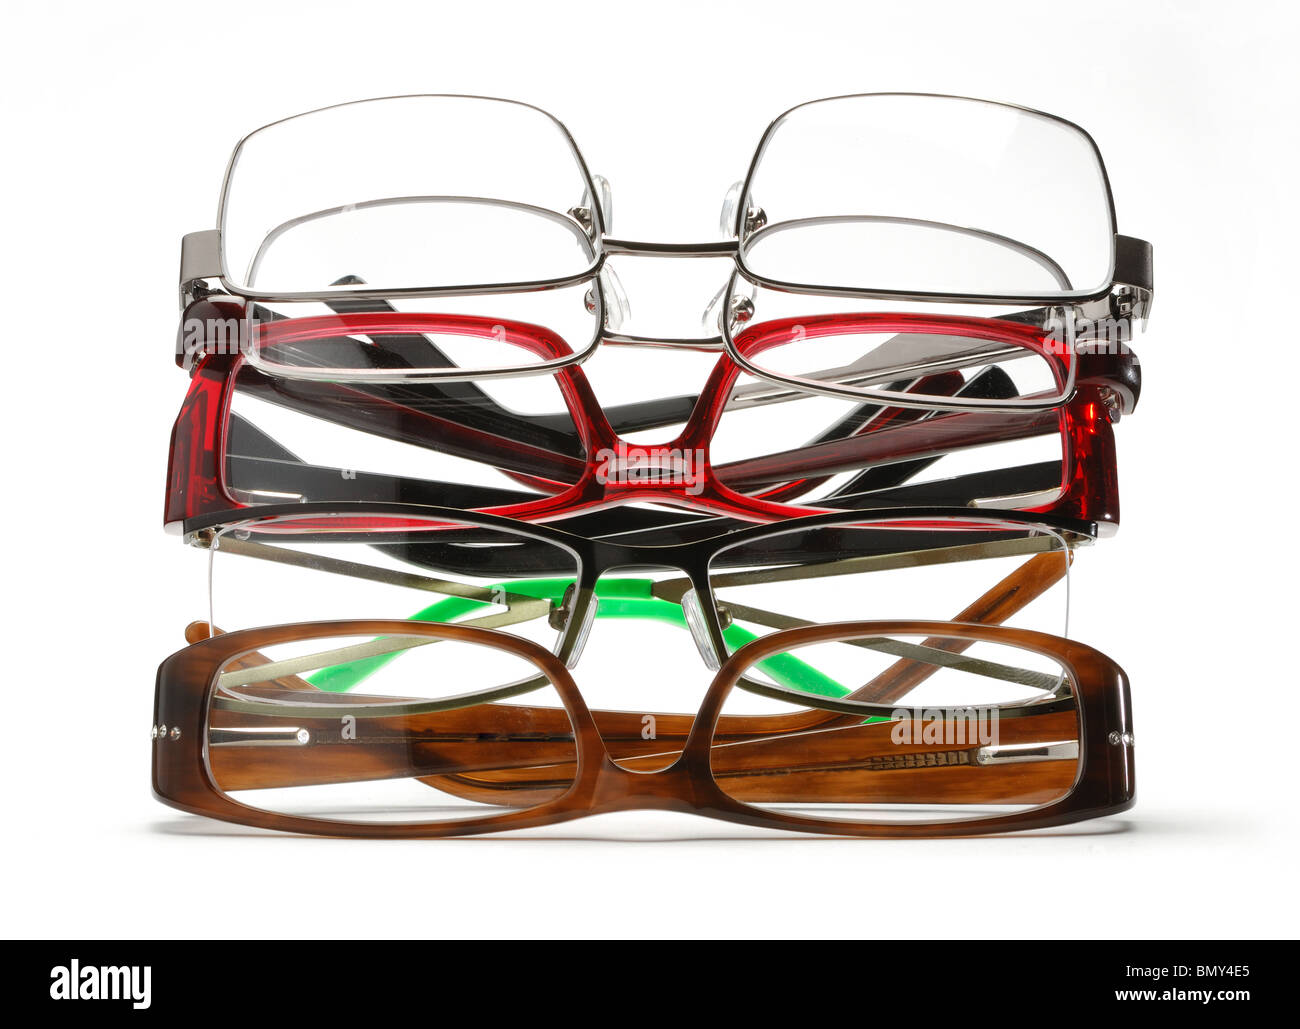 A stack of colorful eye glasses on a white background Stock Photo